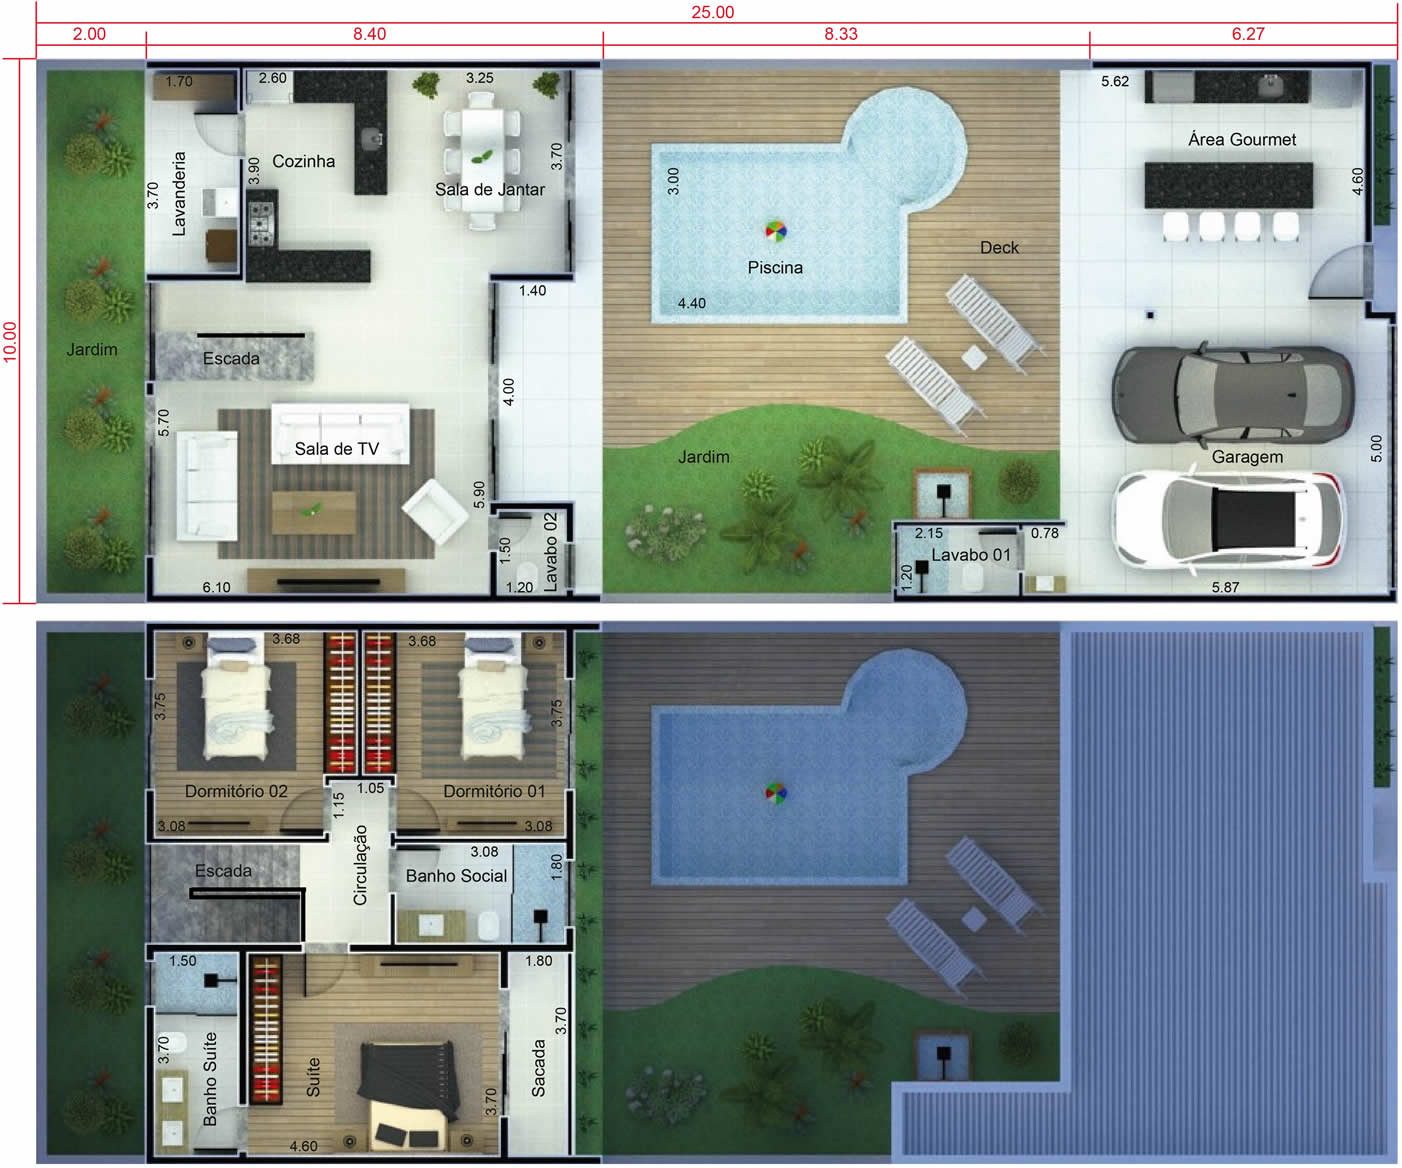 Floor plan with swimming pool in front10x25